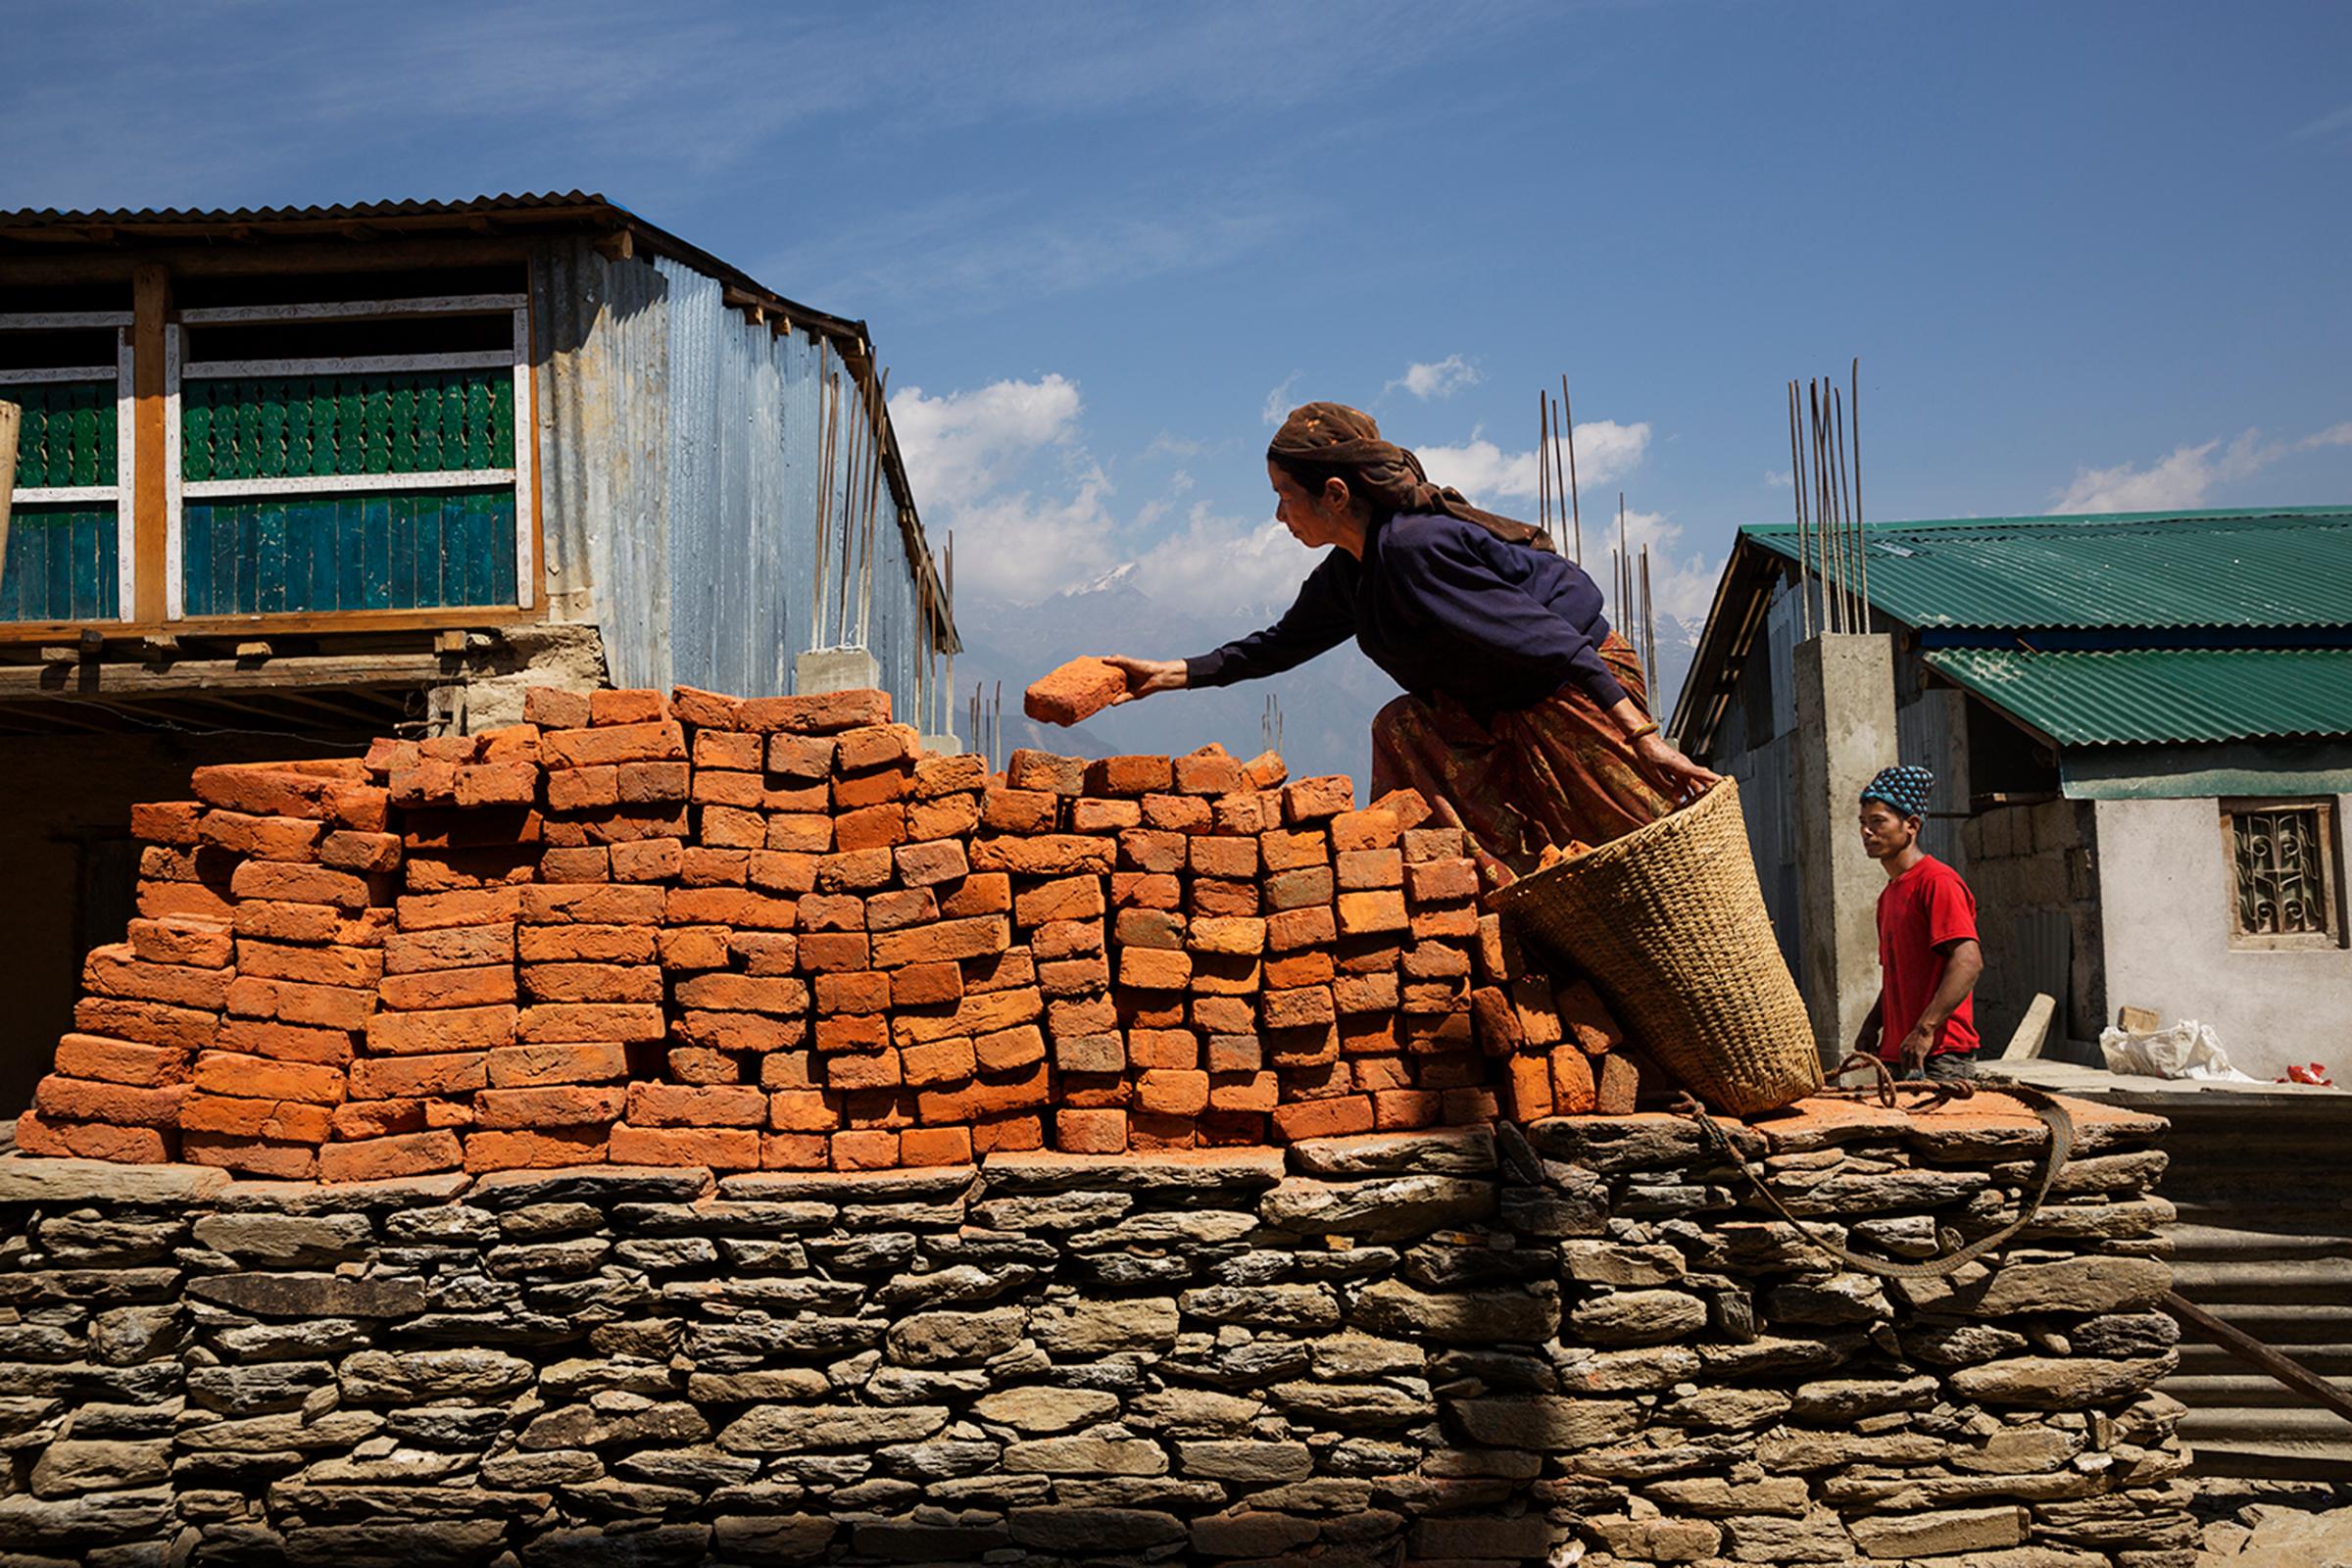 Villagers work at rebuilding a year after the devastating earthquakes of 2015 in Barpak, in Gorkha district, Nepal, April 6, 2016.